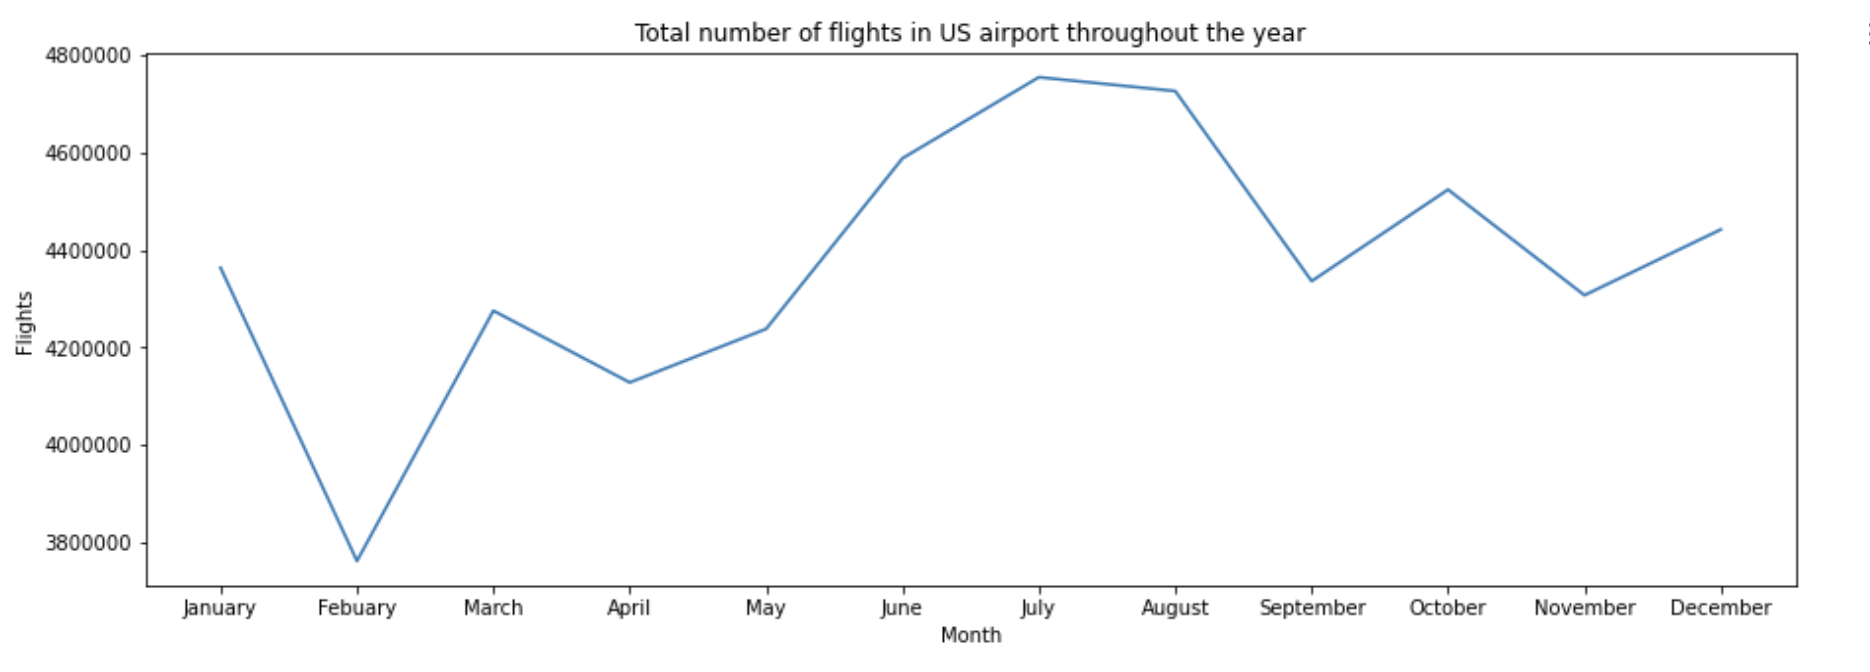 Total number of flights in US airports throughout the year